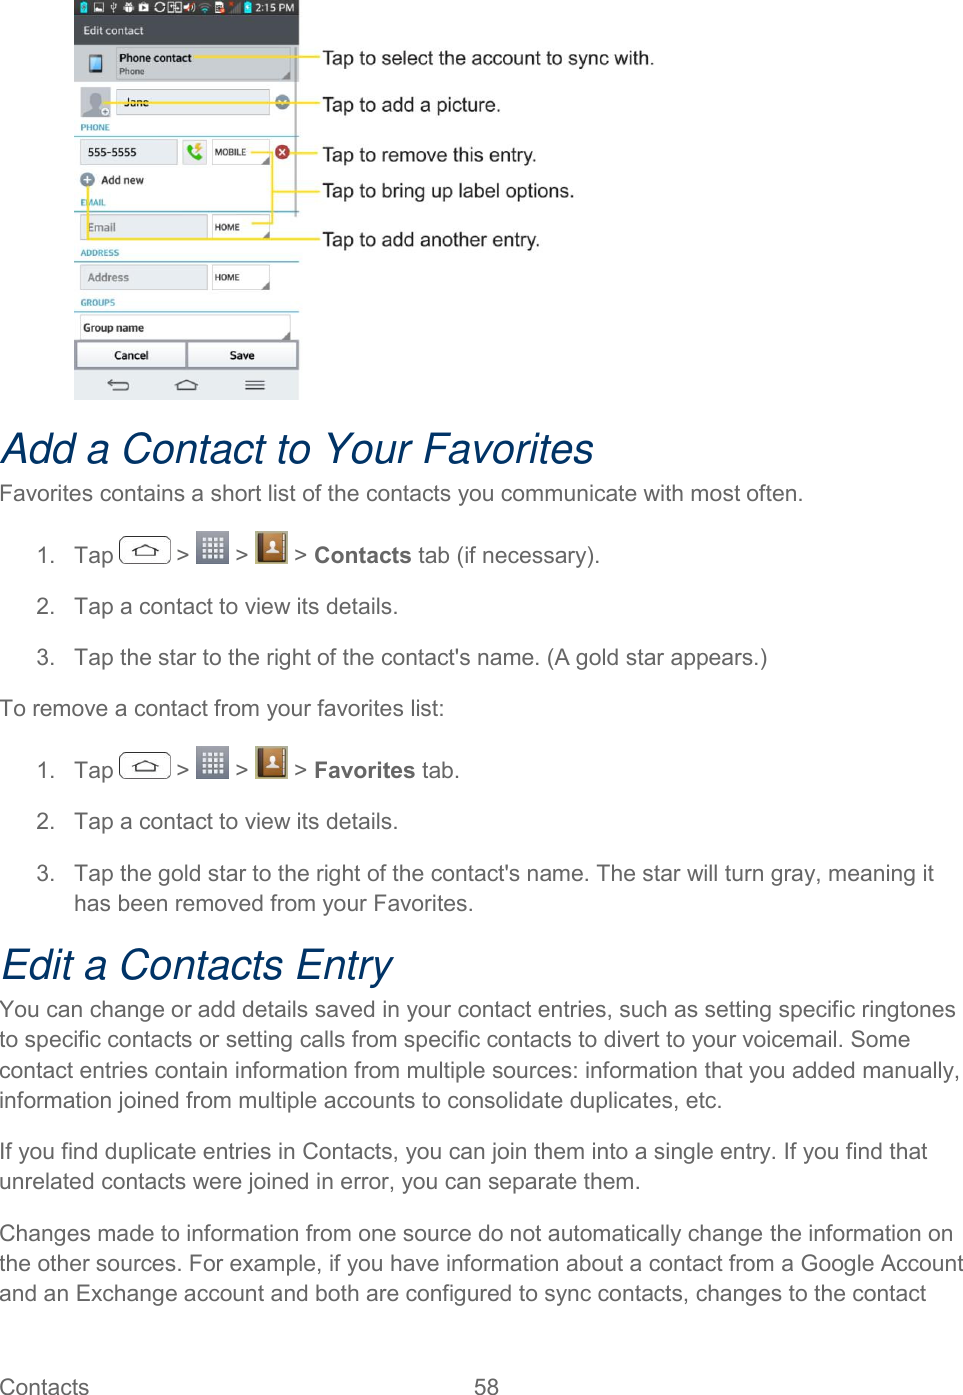  Contacts  58    Add a Contact to Your Favorites Favorites contains a short list of the contacts you communicate with most often. 1.  Tap   &gt;   &gt;   &gt; Contacts tab (if necessary). 2.  Tap a contact to view its details. 3.  Tap the star to the right of the contact&apos;s name. (A gold star appears.) To remove a contact from your favorites list: 1.  Tap   &gt;   &gt;   &gt; Favorites tab. 2.  Tap a contact to view its details. 3.  Tap the gold star to the right of the contact&apos;s name. The star will turn gray, meaning it has been removed from your Favorites. Edit a Contacts Entry You can change or add details saved in your contact entries, such as setting specific ringtones to specific contacts or setting calls from specific contacts to divert to your voicemail. Some contact entries contain information from multiple sources: information that you added manually, information joined from multiple accounts to consolidate duplicates, etc. If you find duplicate entries in Contacts, you can join them into a single entry. If you find that unrelated contacts were joined in error, you can separate them. Changes made to information from one source do not automatically change the information on the other sources. For example, if you have information about a contact from a Google Account and an Exchange account and both are configured to sync contacts, changes to the contact 